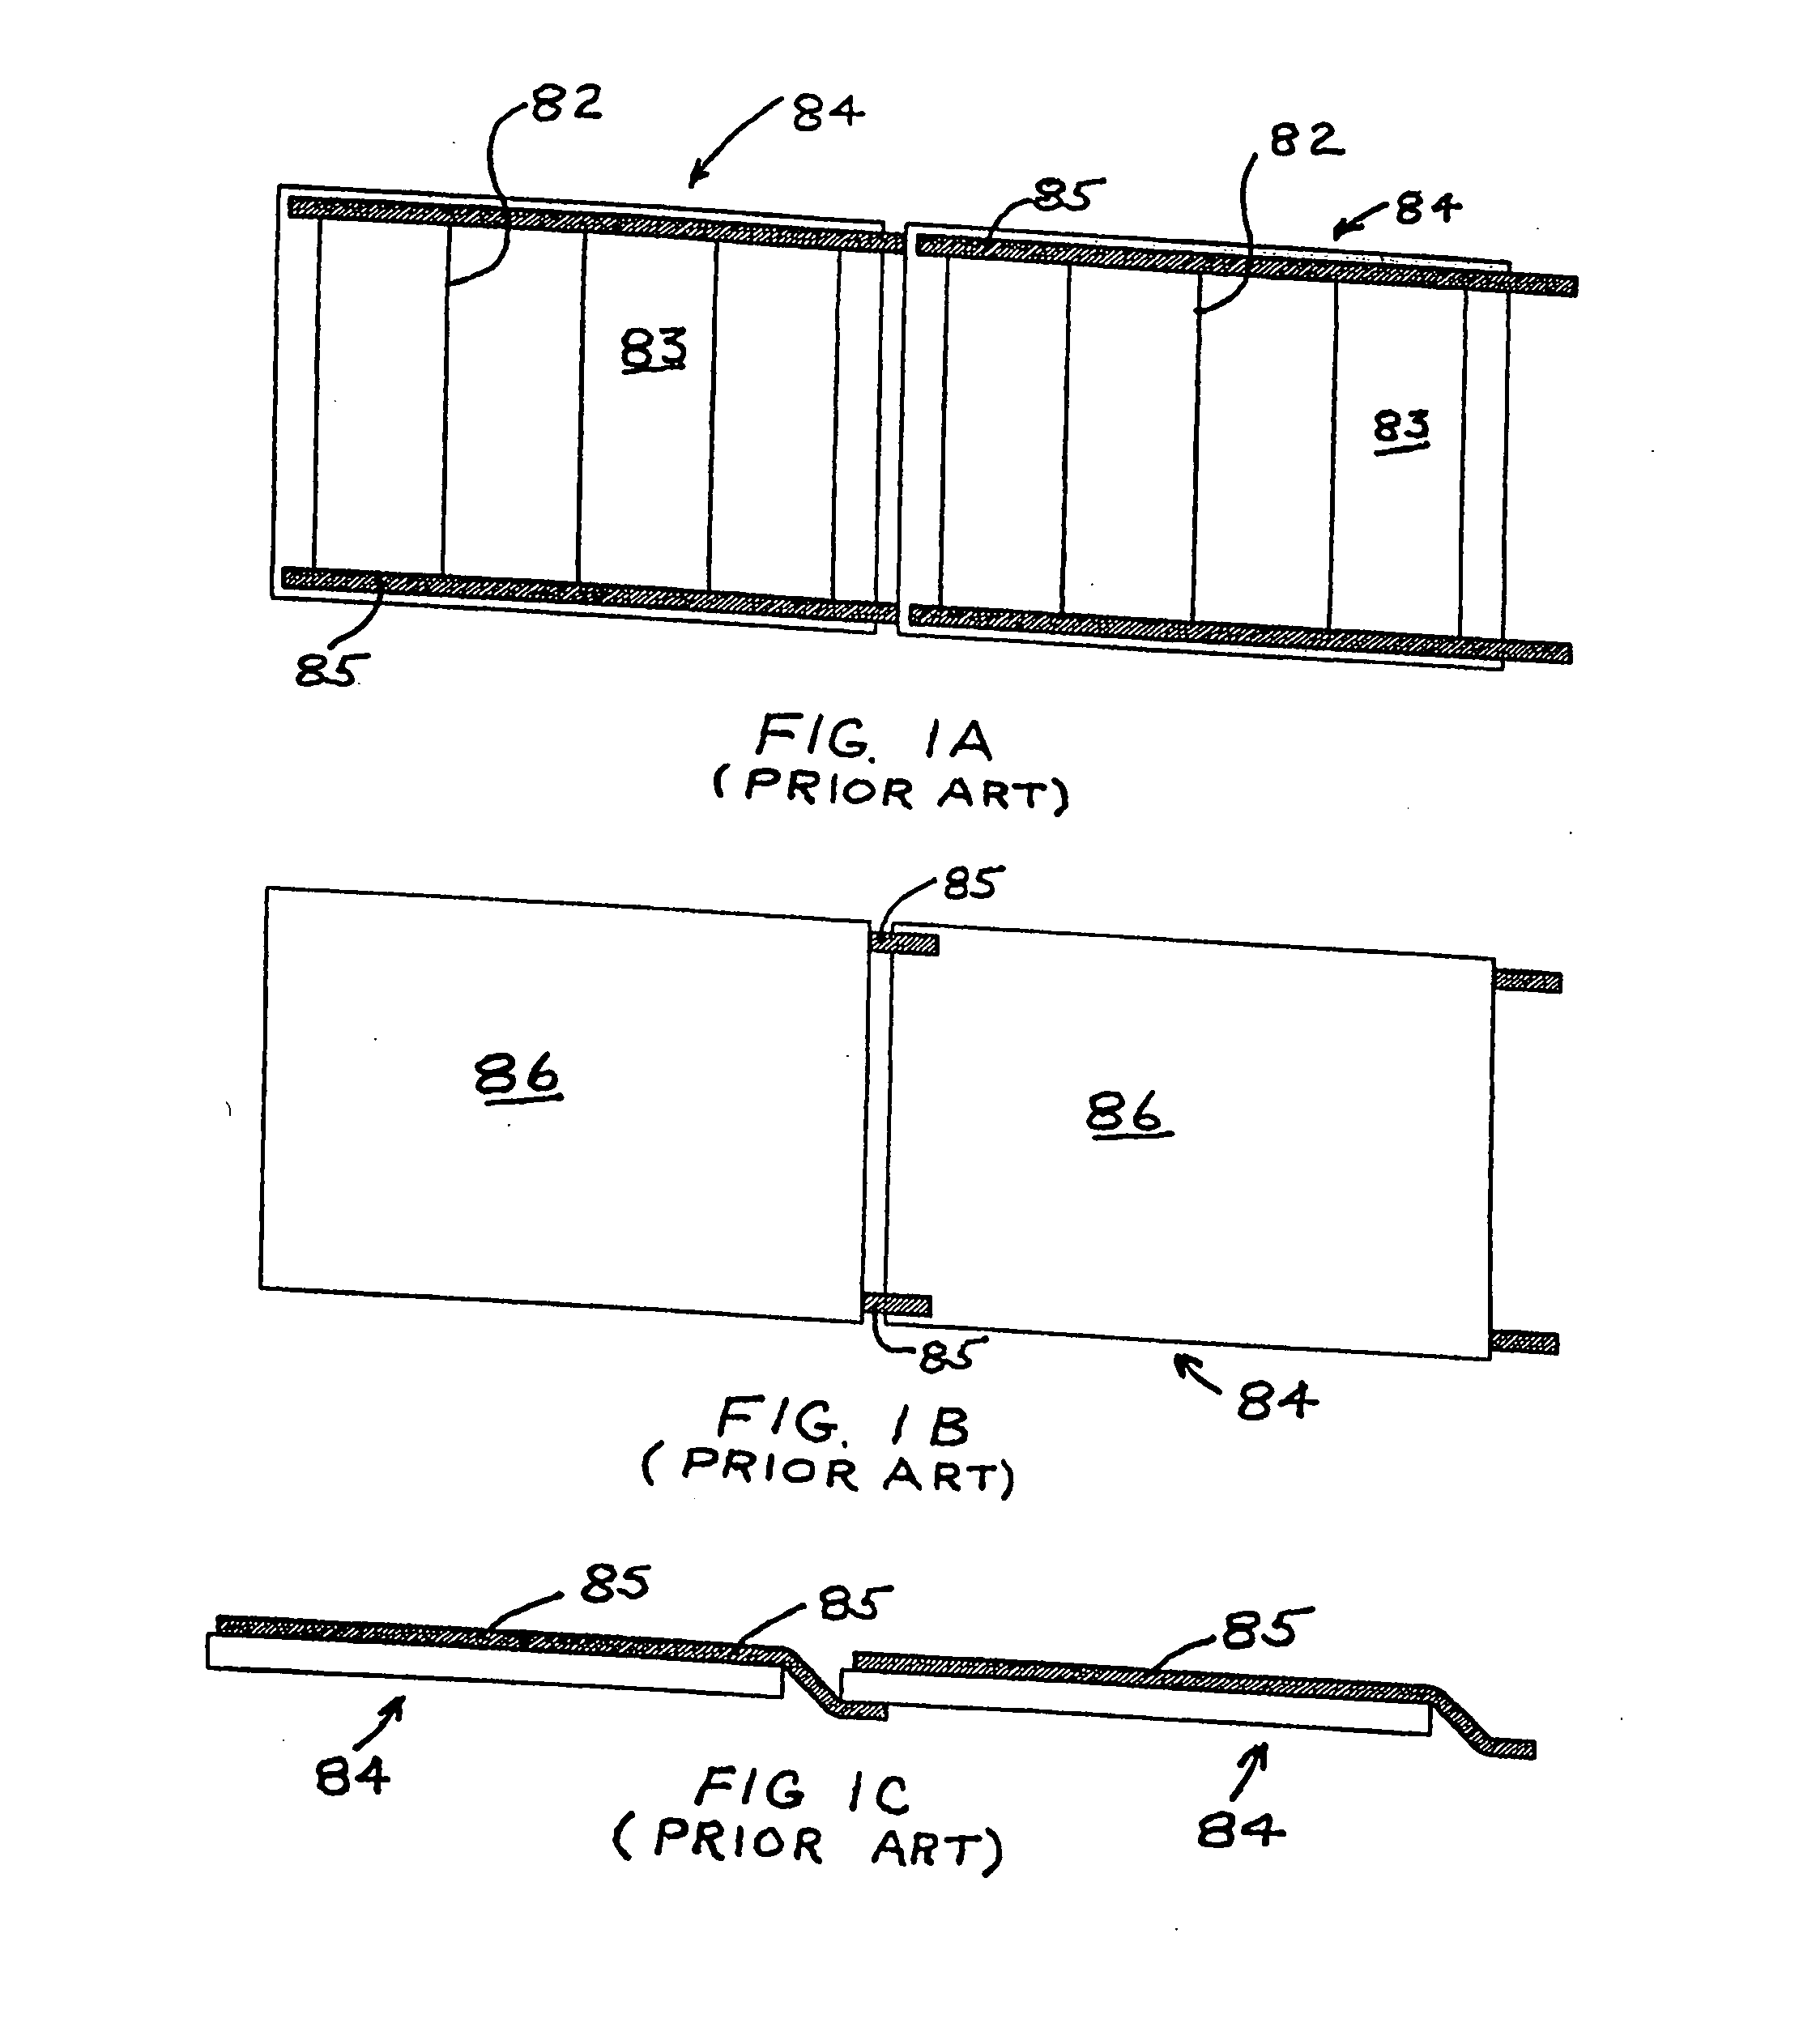 Substrate structures for integrated series connected photovoltaic arrays and process of manufacture of such arrays